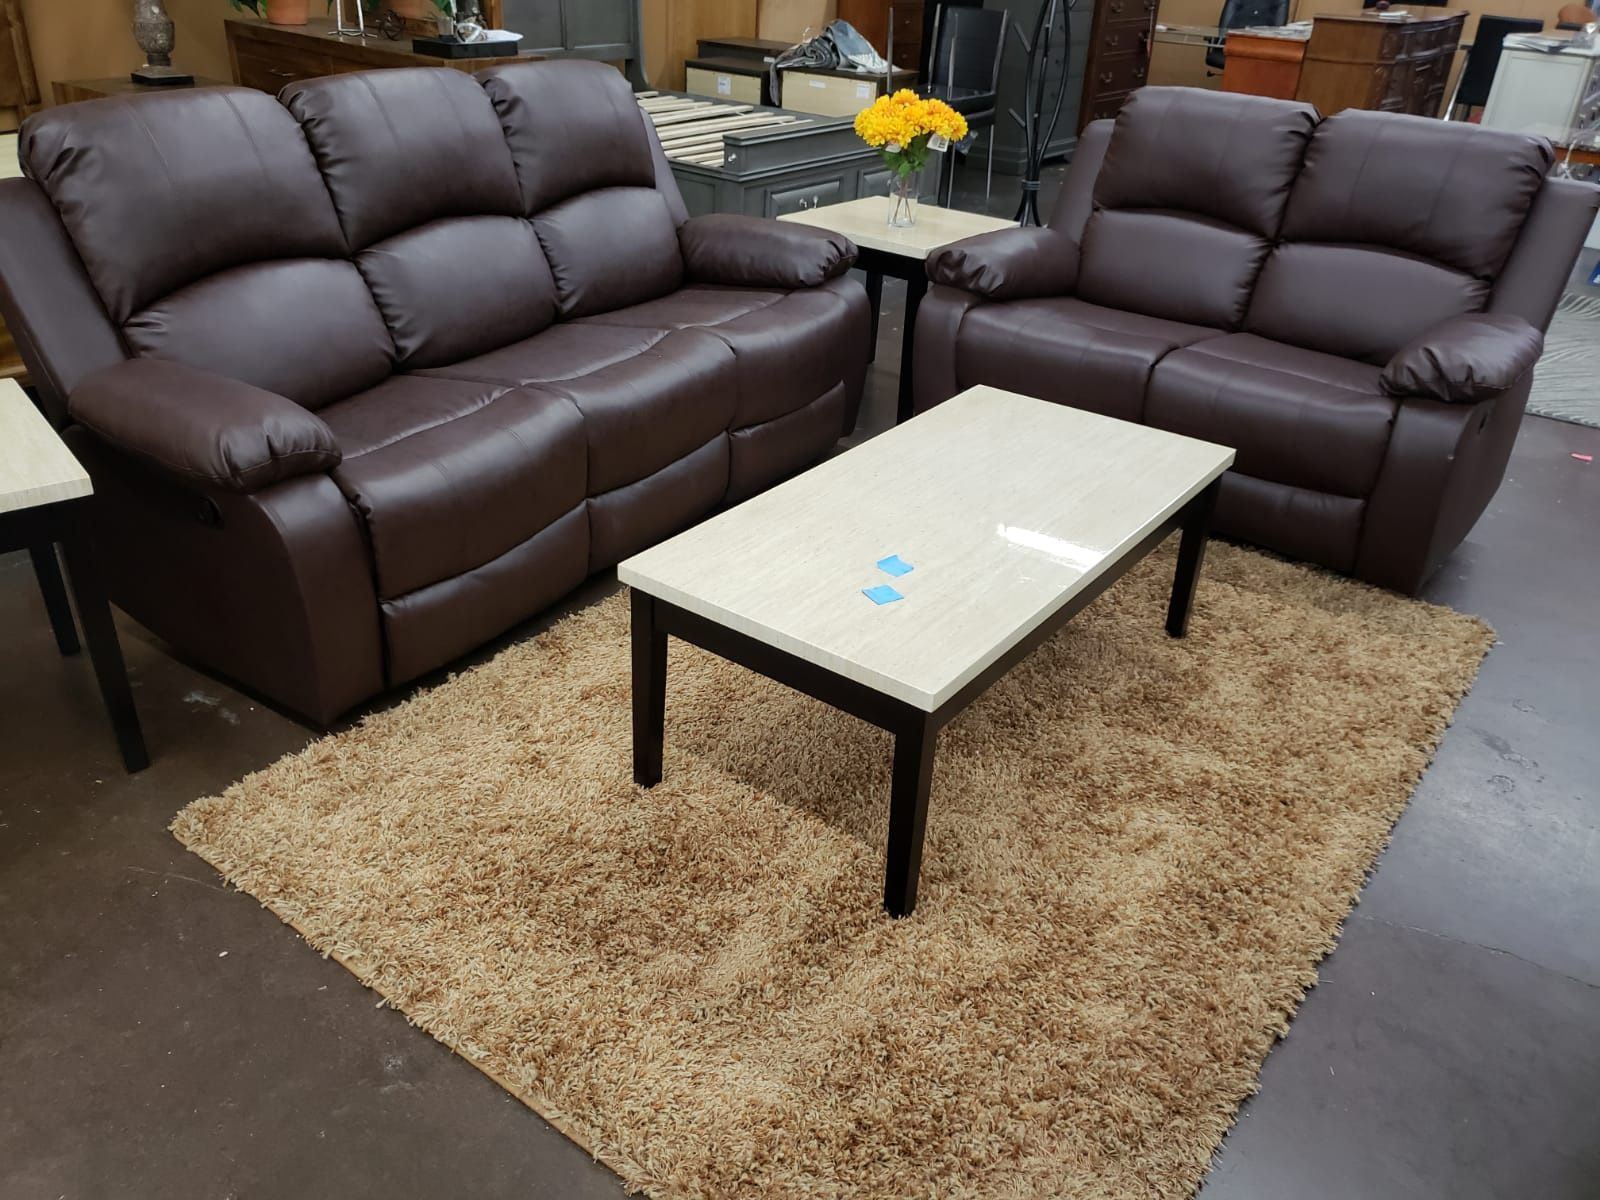 Brown leather reclining sofa and Loveseat